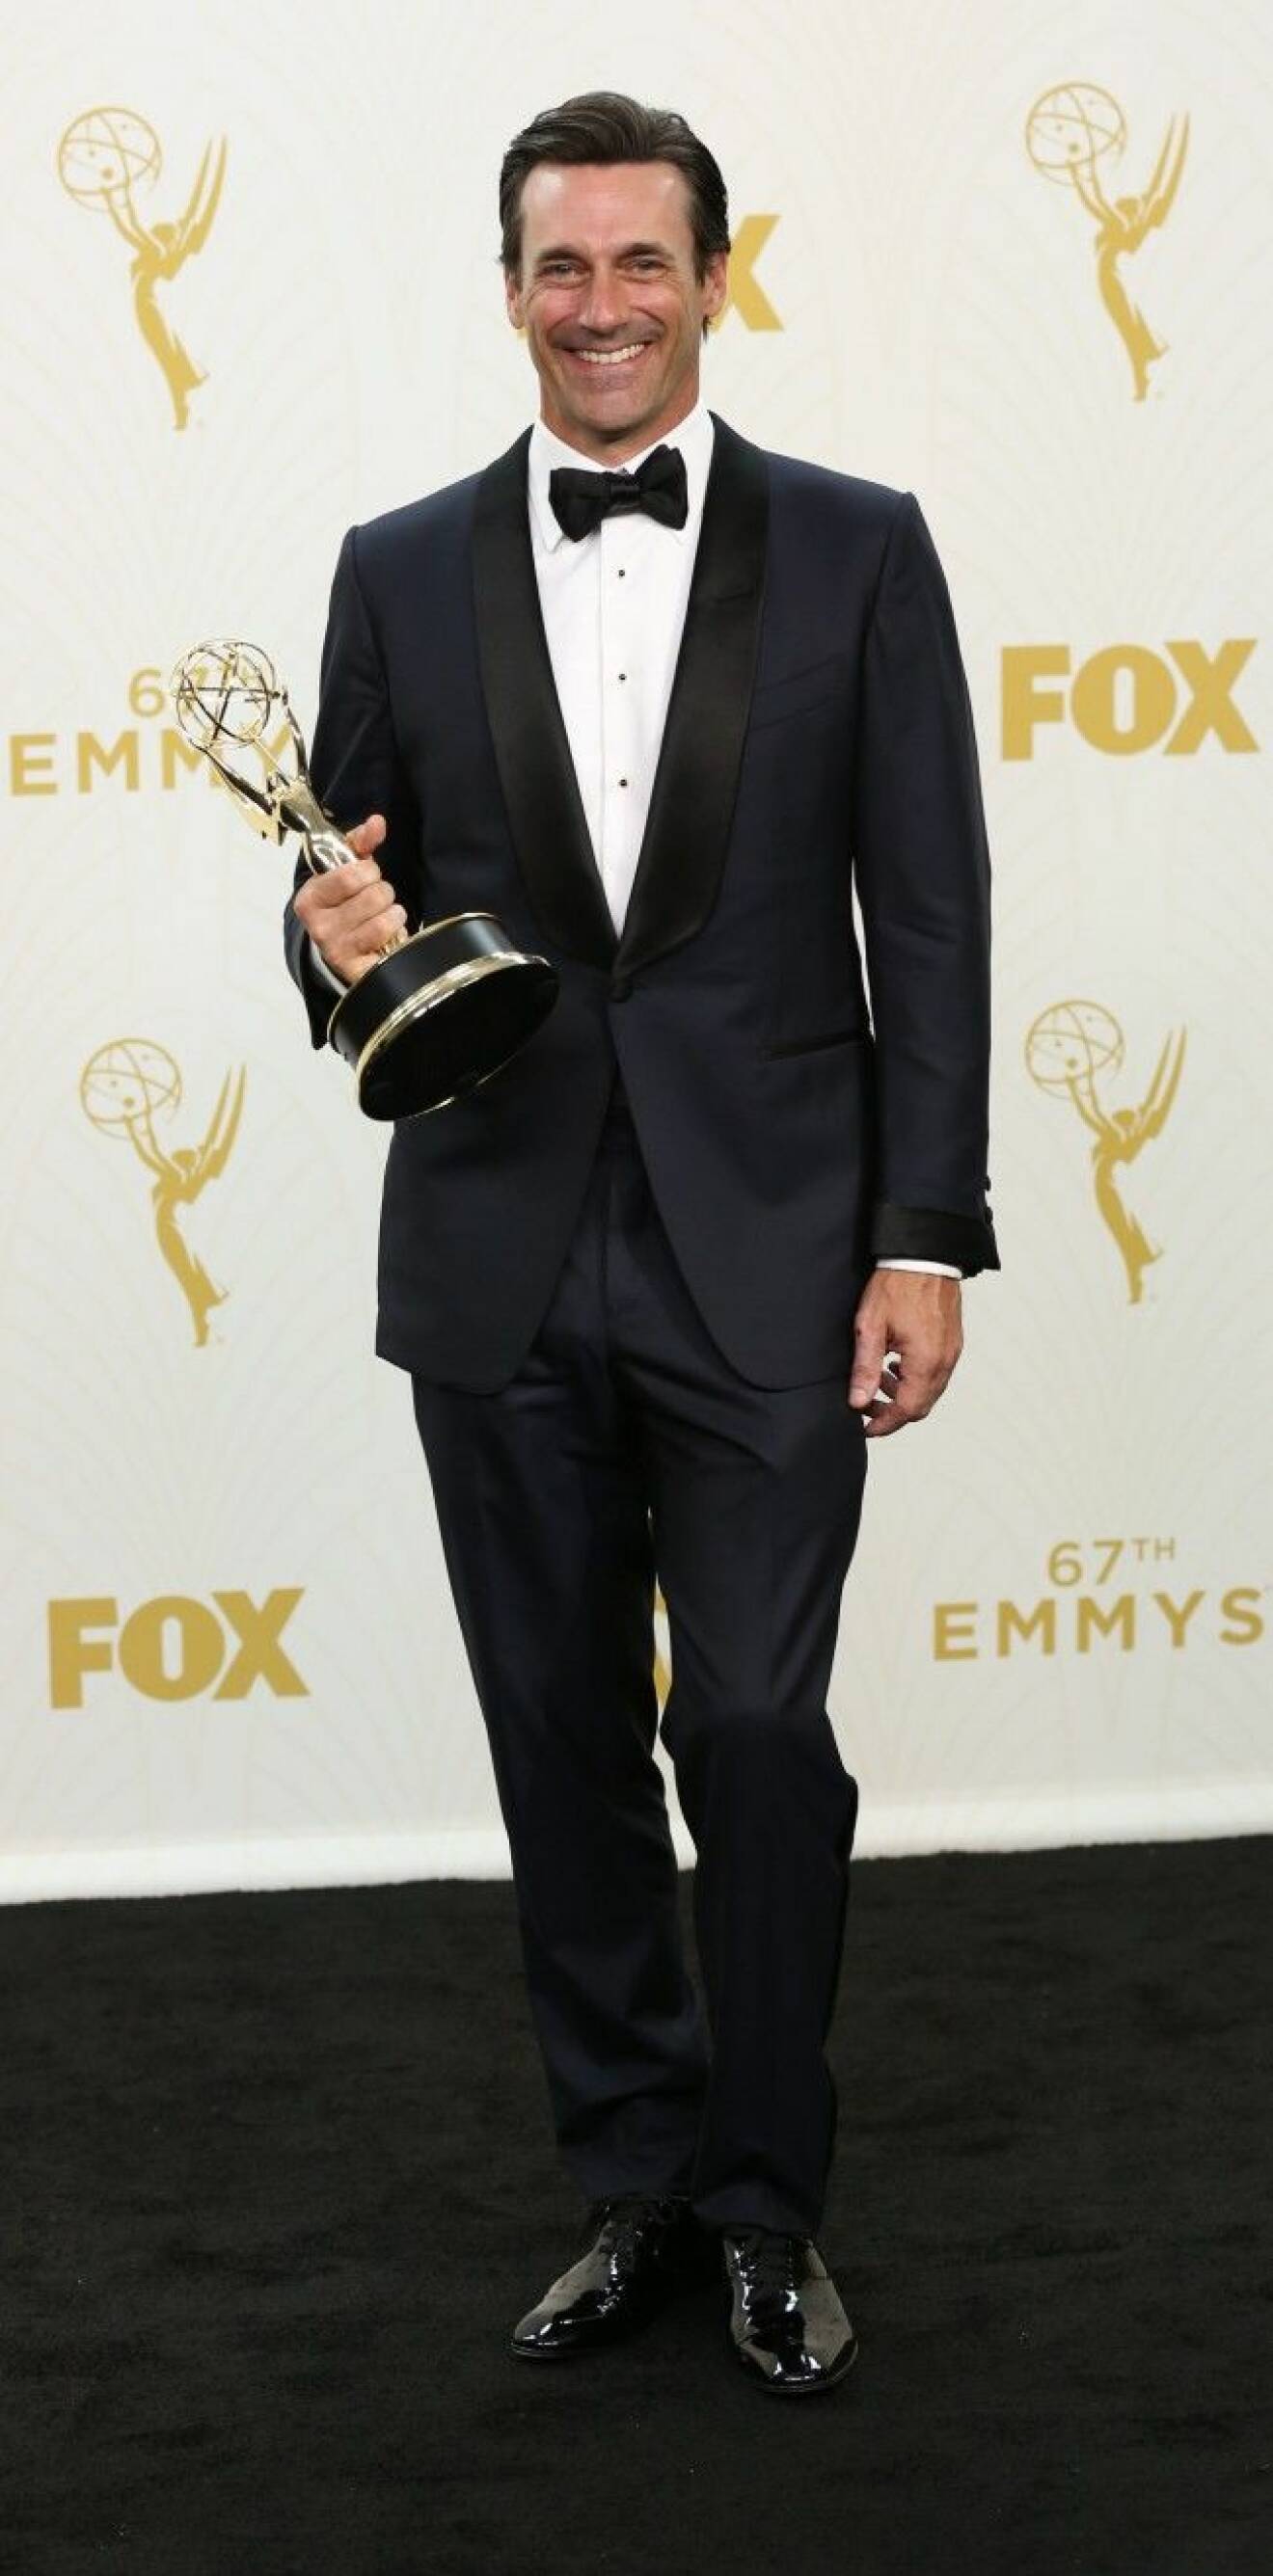 67th Annual Primetime Emmy Awards at Microsoft Theater - Press Room Featuring: Jon Hamm Where: Los Angeles, California, United States When: 20 Sep 2015 Credit: Brian To/WENN.com